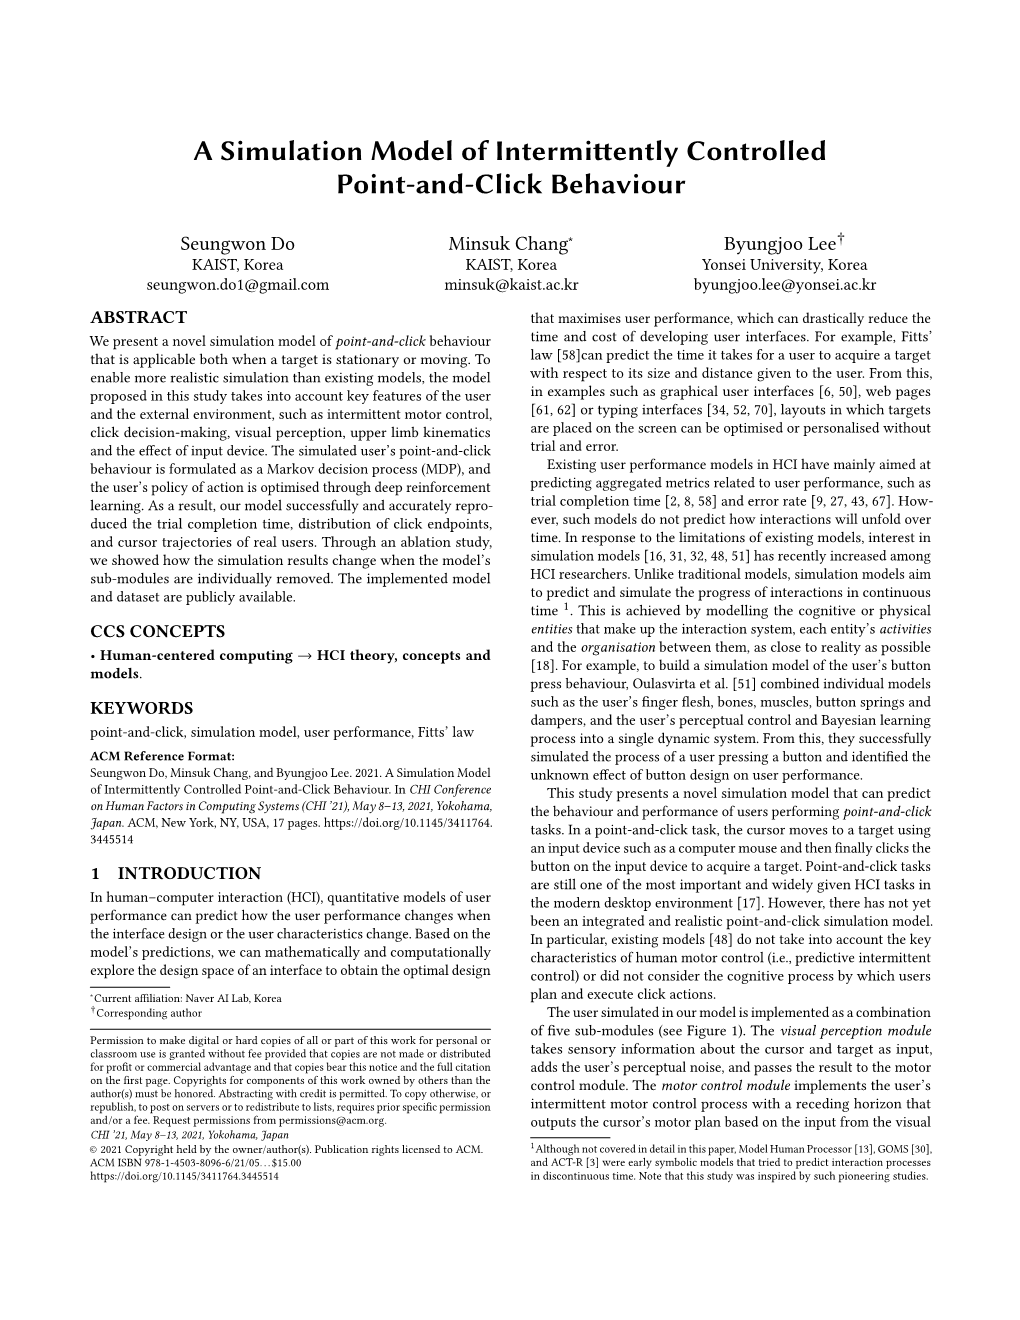 A Simulation Model of Intermittently Controlled Point-And-Click Behaviour